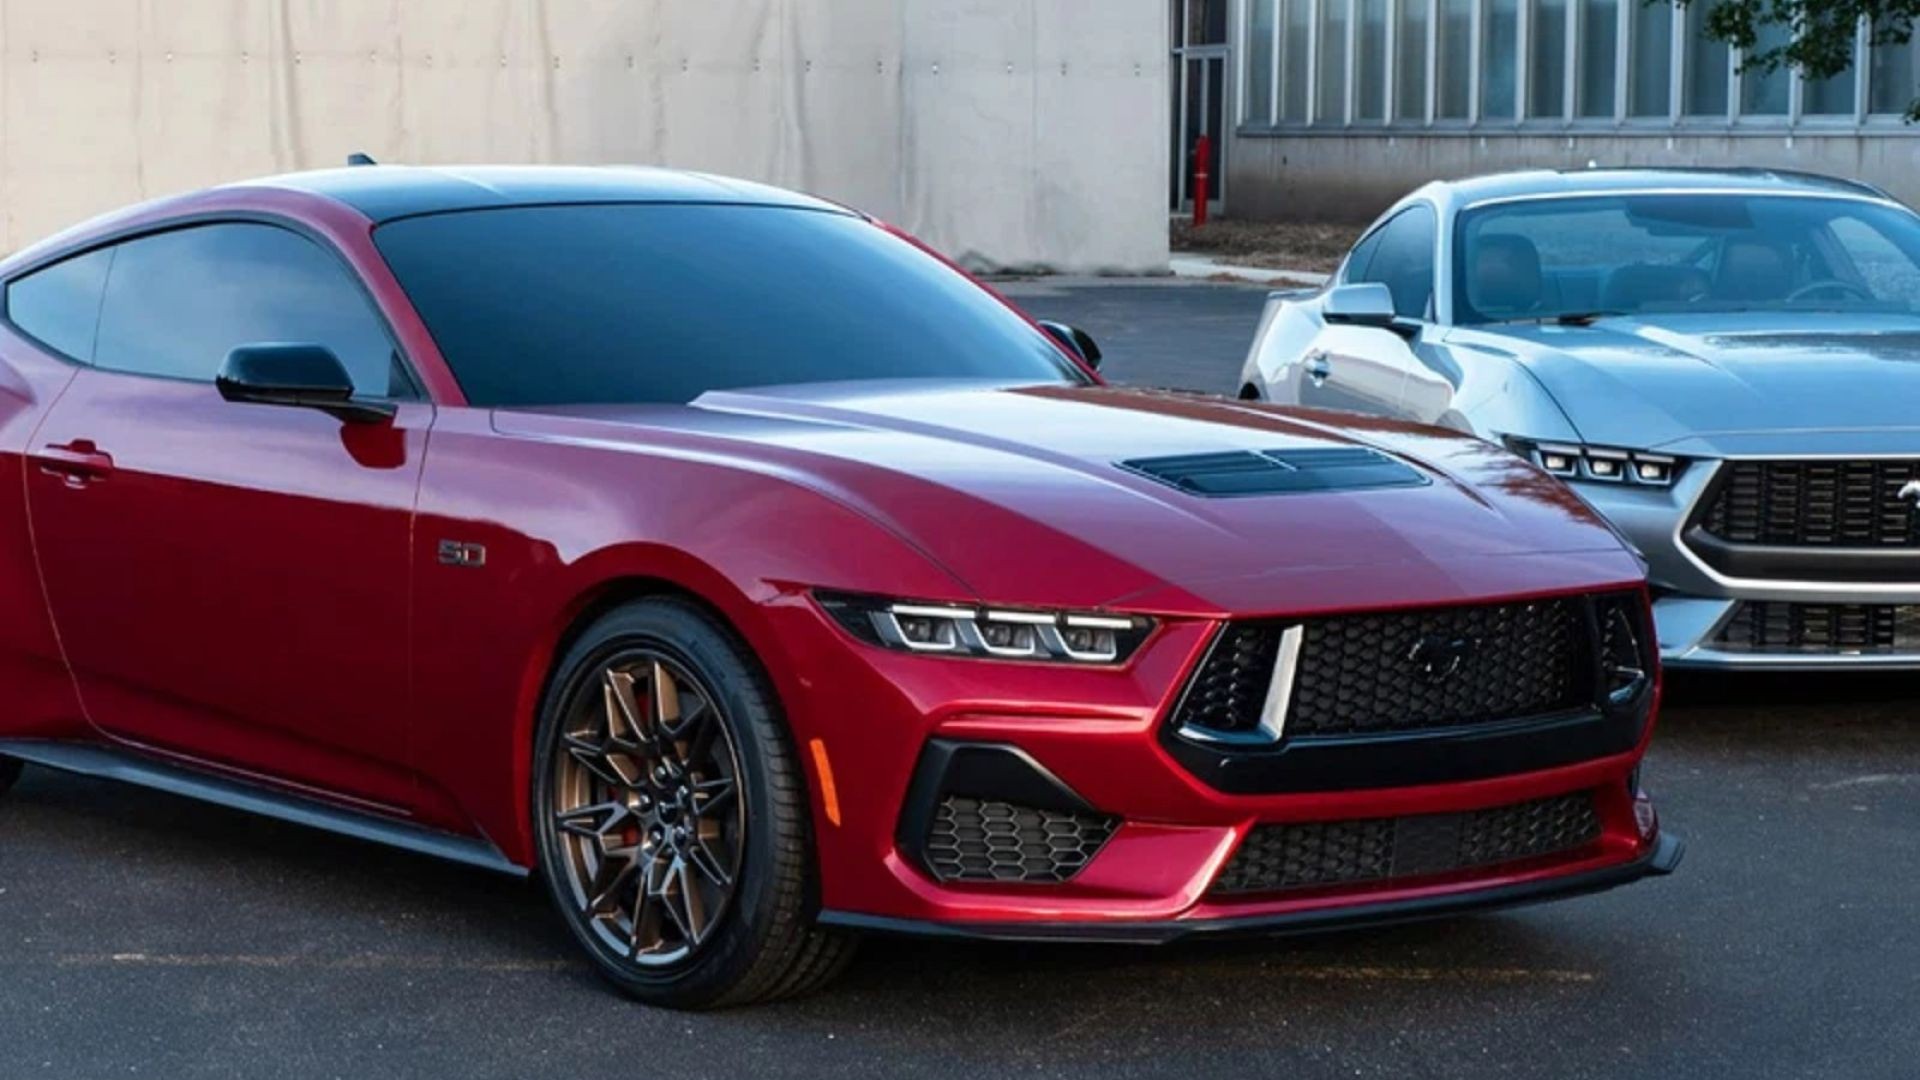 New Ford Mustang: the ULTIMATE Muscle Car?